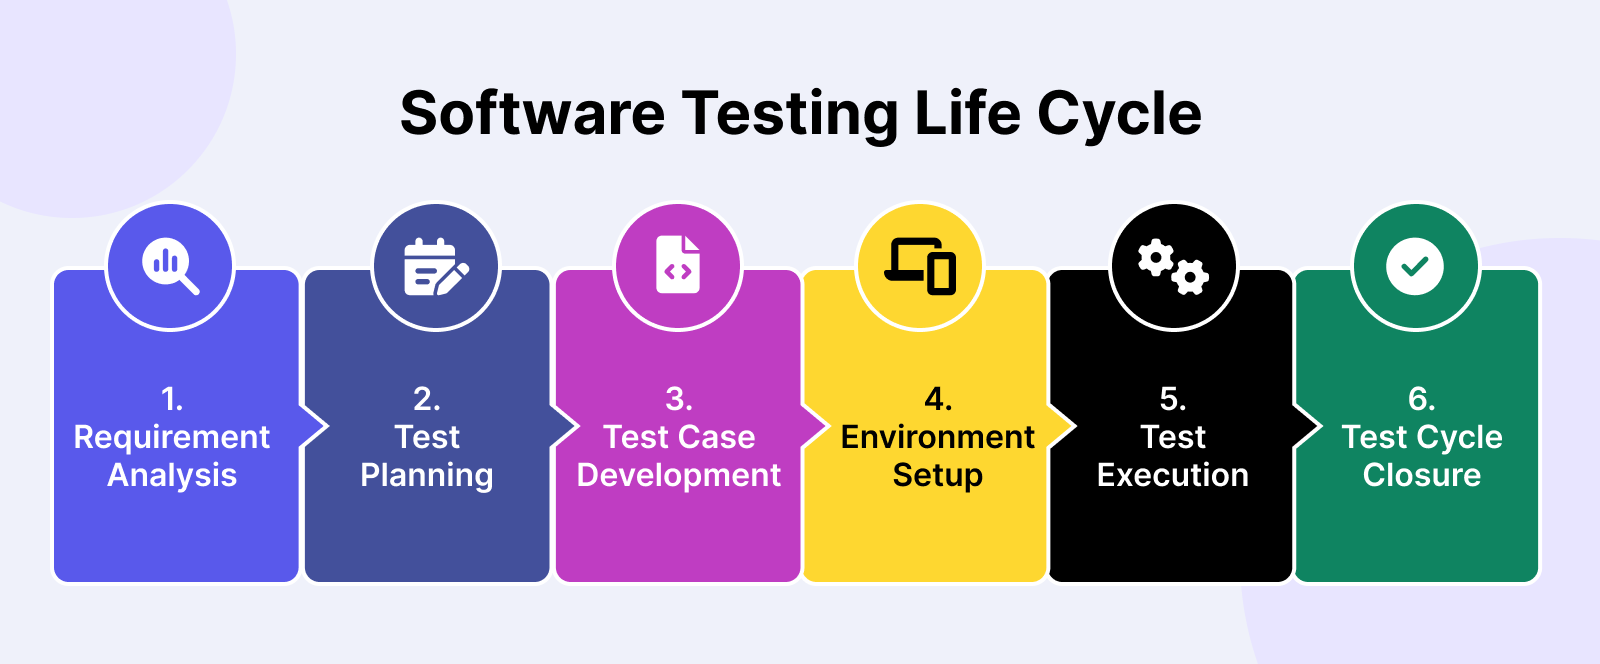 Software_Testing_Life_Cycle